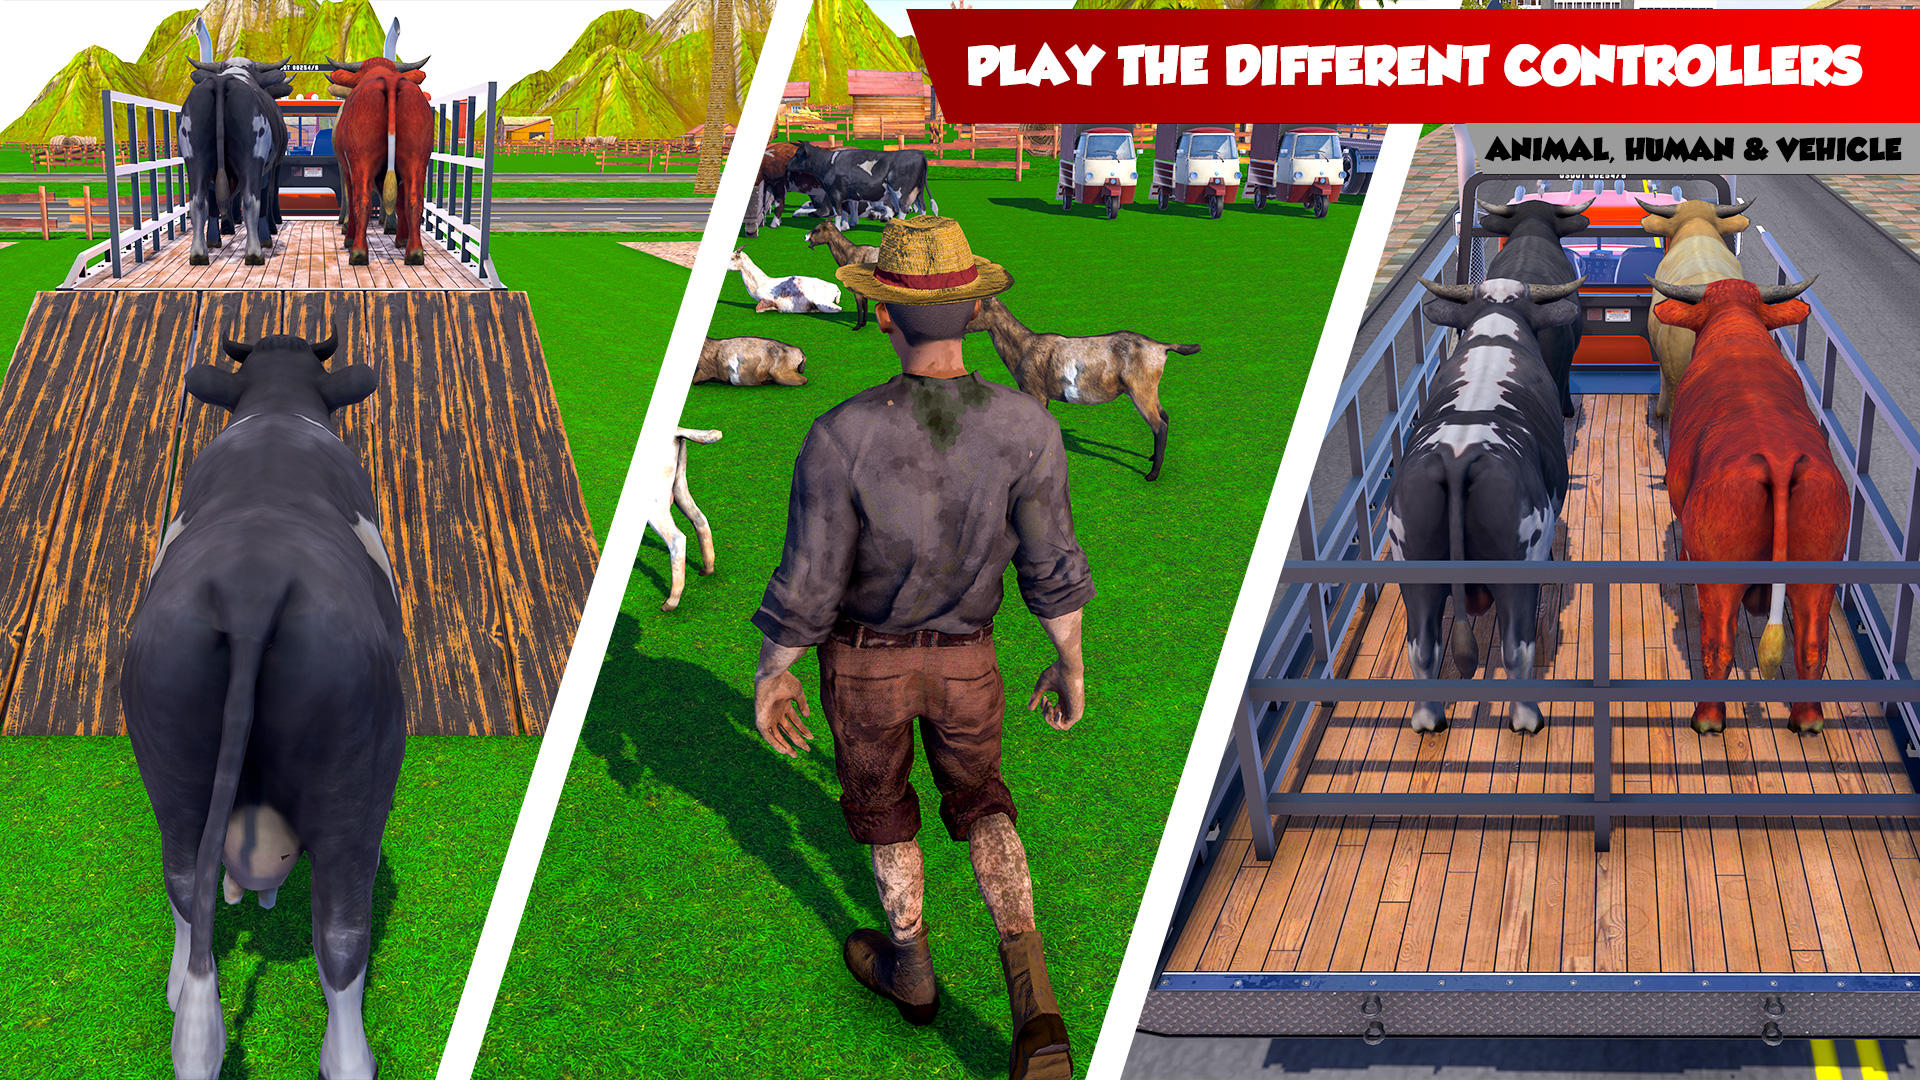 Ranch Simulator: Grand Farming life Tips APK for Android Download